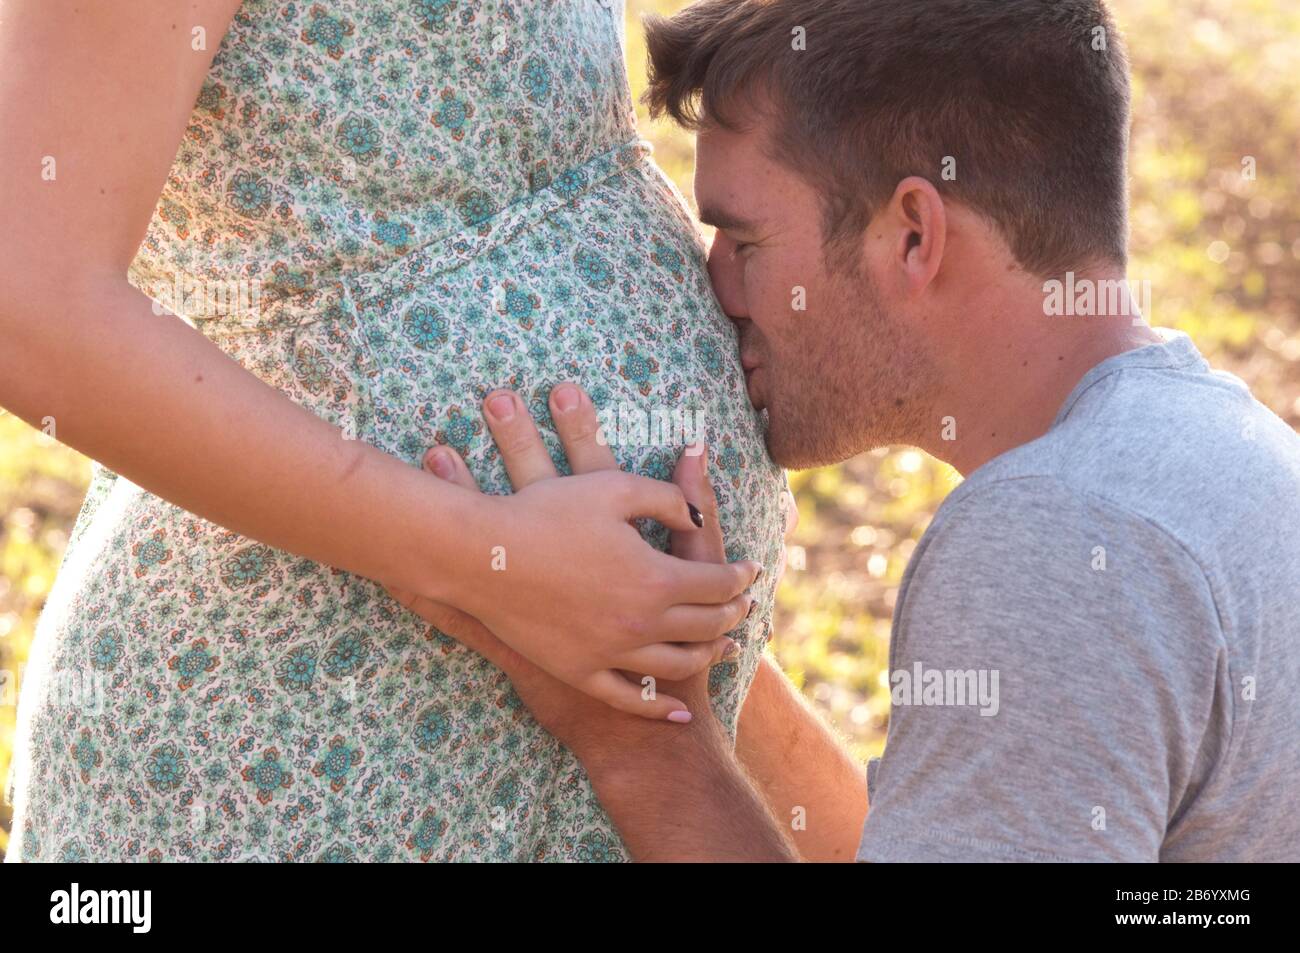 Pregnant young woman standing in a field, with her partner kneeling caressing her tummy, close-up Stock Photo